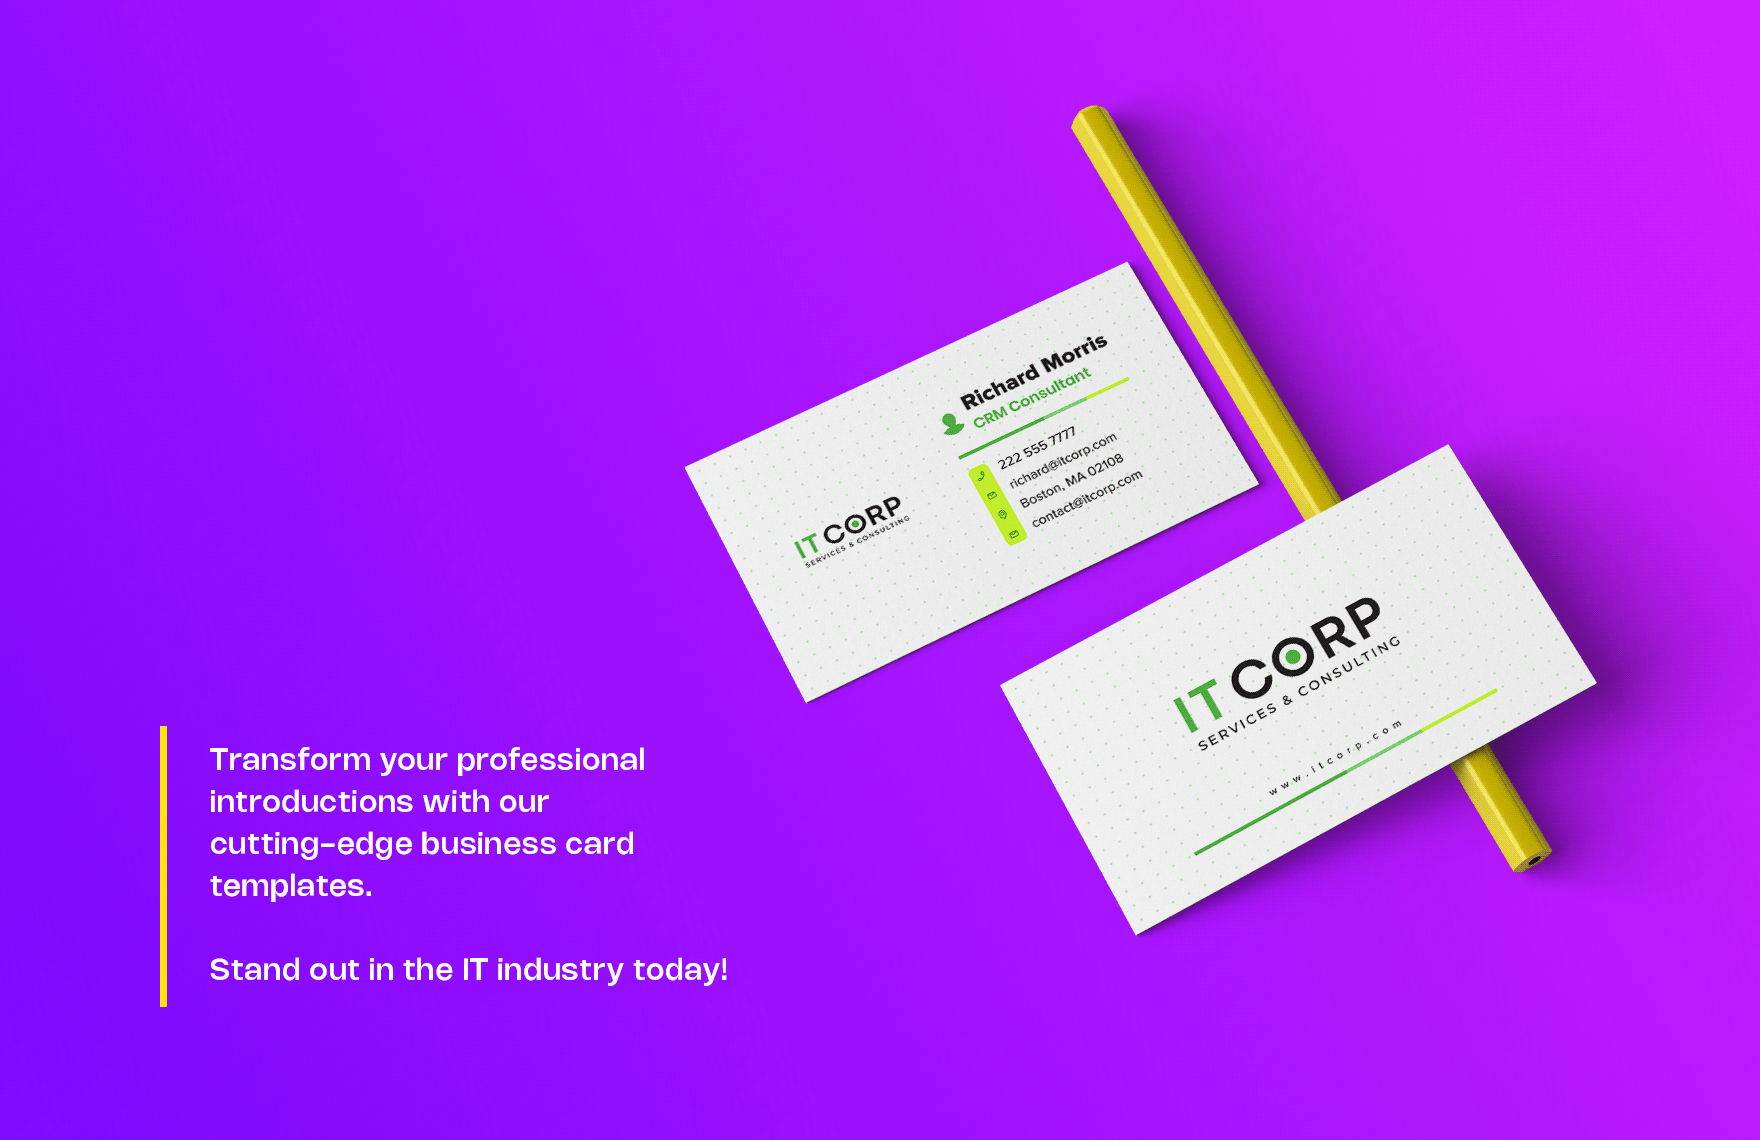 IT Content Management Systems (CMS) Consulting Business Card Template